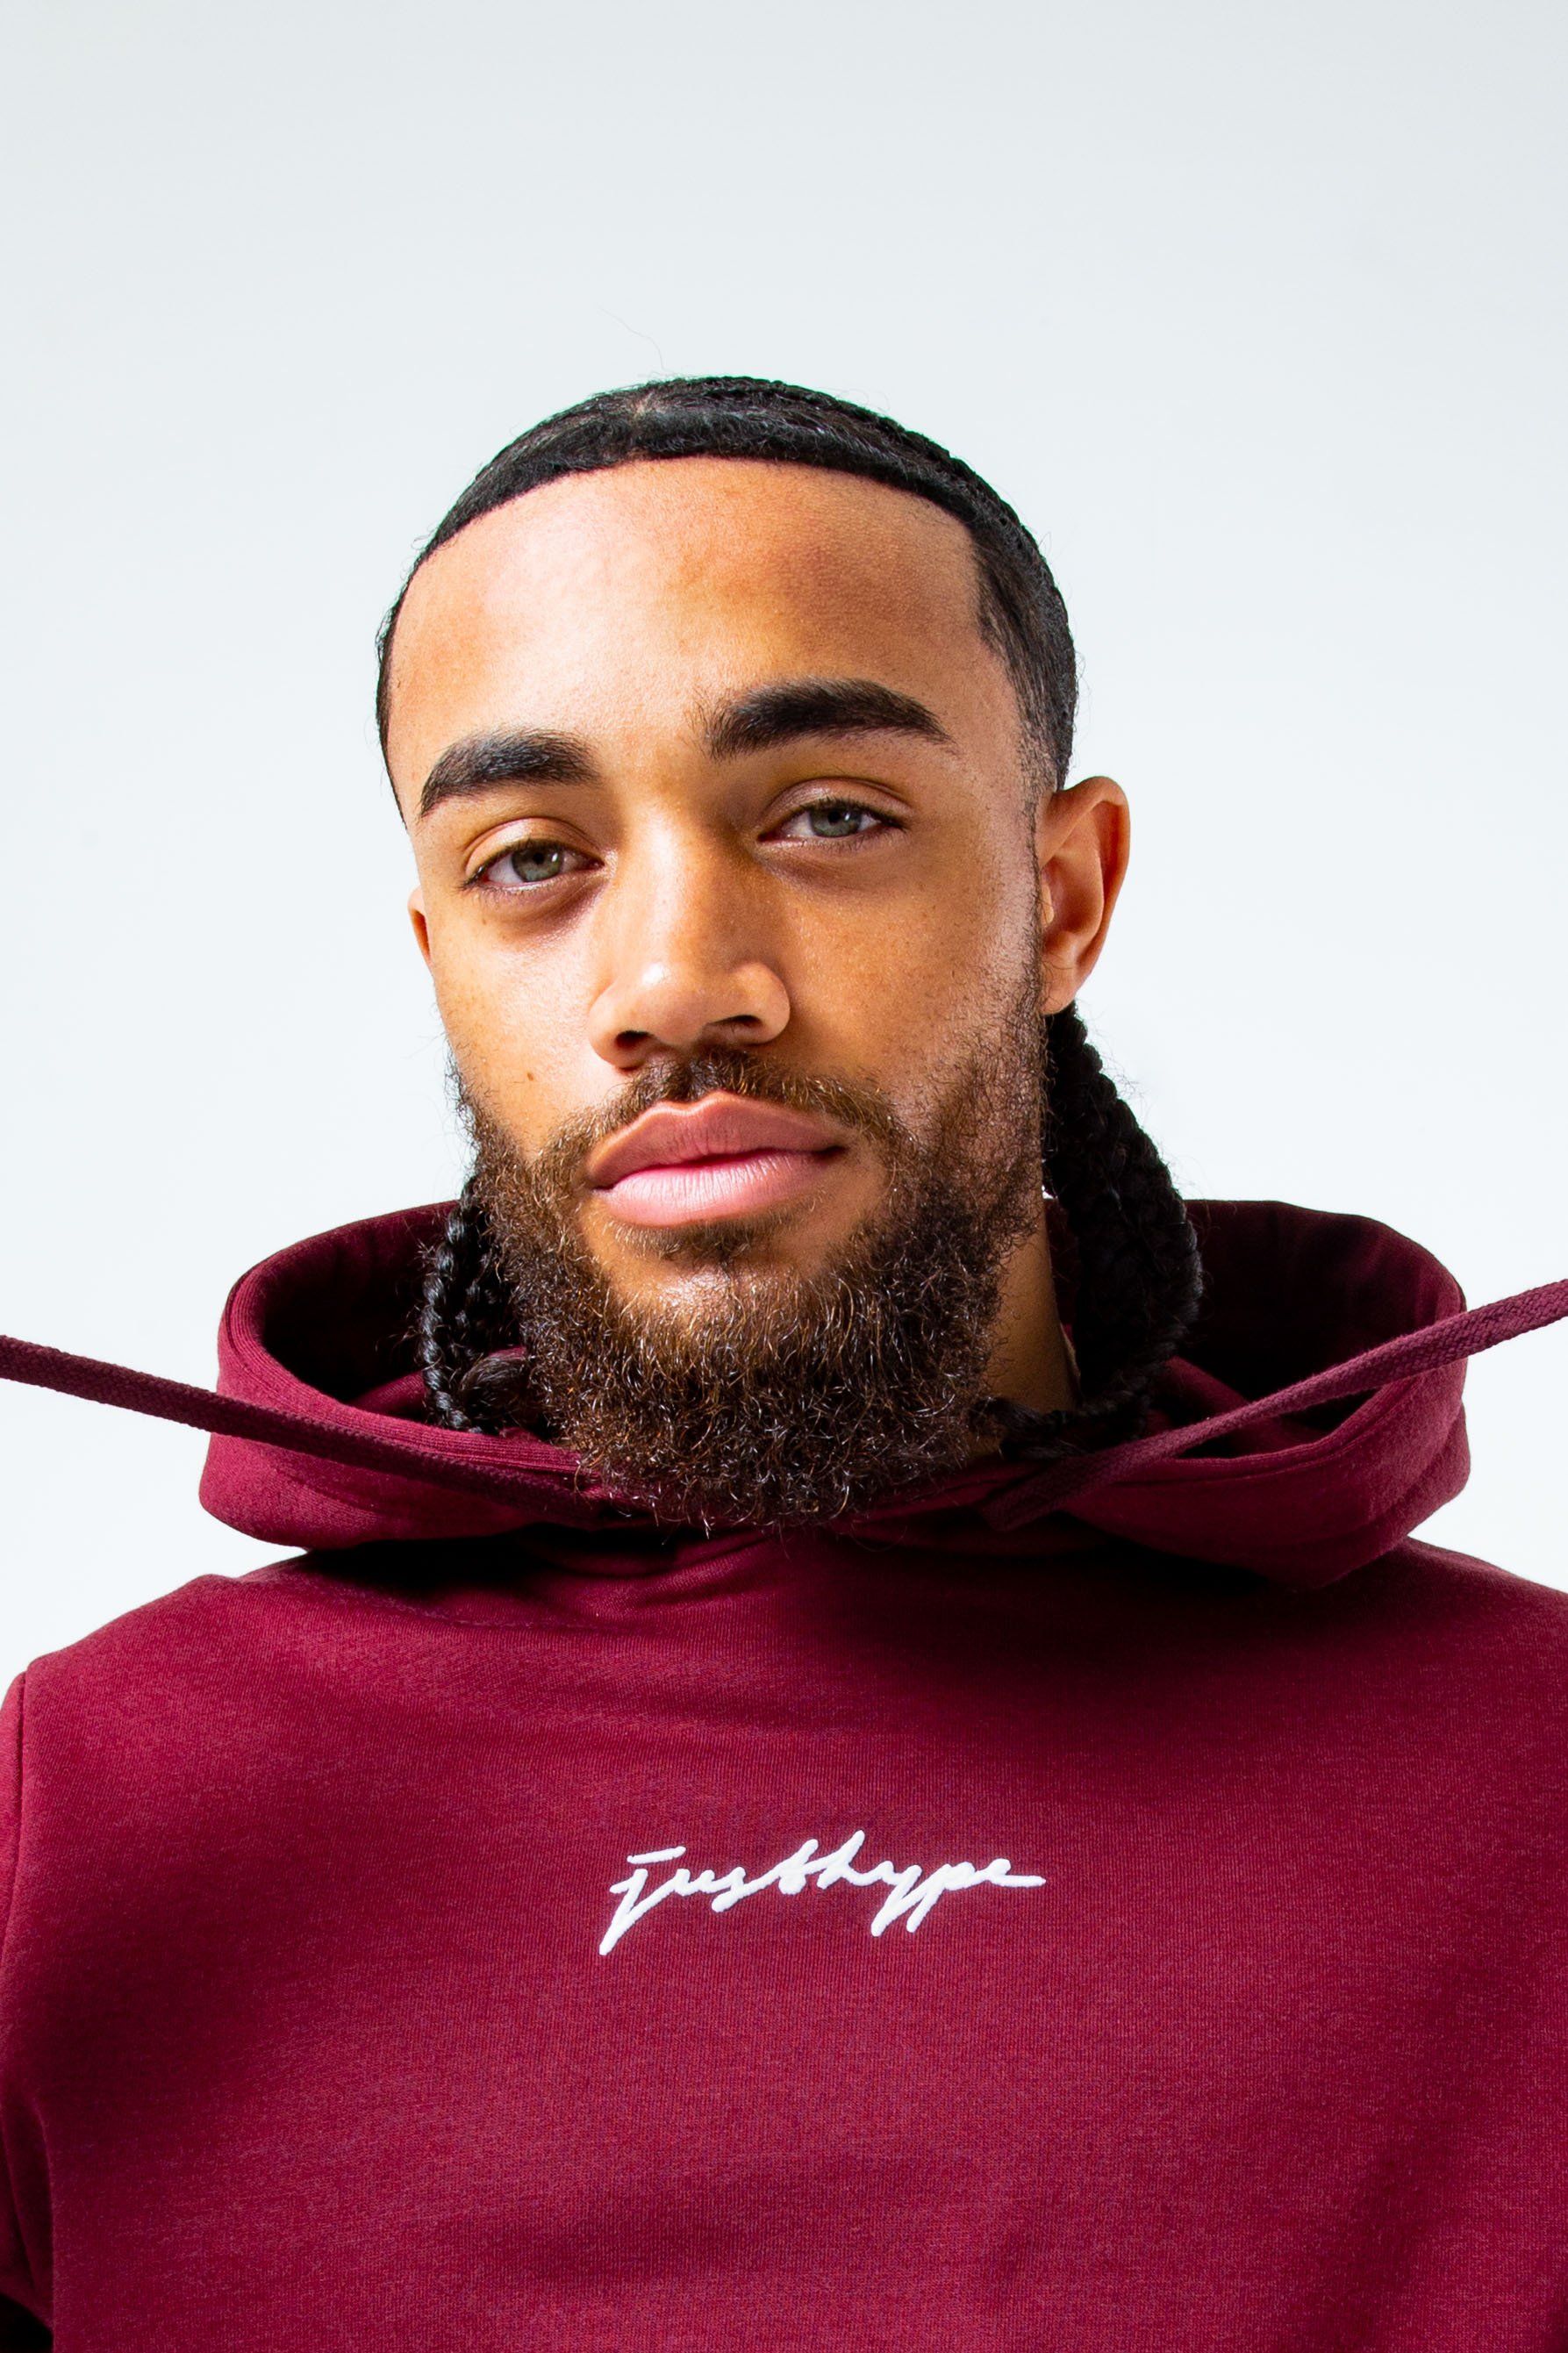 The hoodie staple you need every season. The HYPE. Burgundy Men's Pullover Hoodie is available in a sizes XXS to XXXL. Boasting a fabric base of 80% cotton and 20% polyester, creating the supreme amount of comfort you need. For a relaxed casual vibe, wear with the matching joggers to complete the look. Designed in a burgundy base with a contrasting black embroidered new! justhype signature logo. Finished with a fixed hood, kangaroo pocket and fitted hem and cuffs. Machine washable.